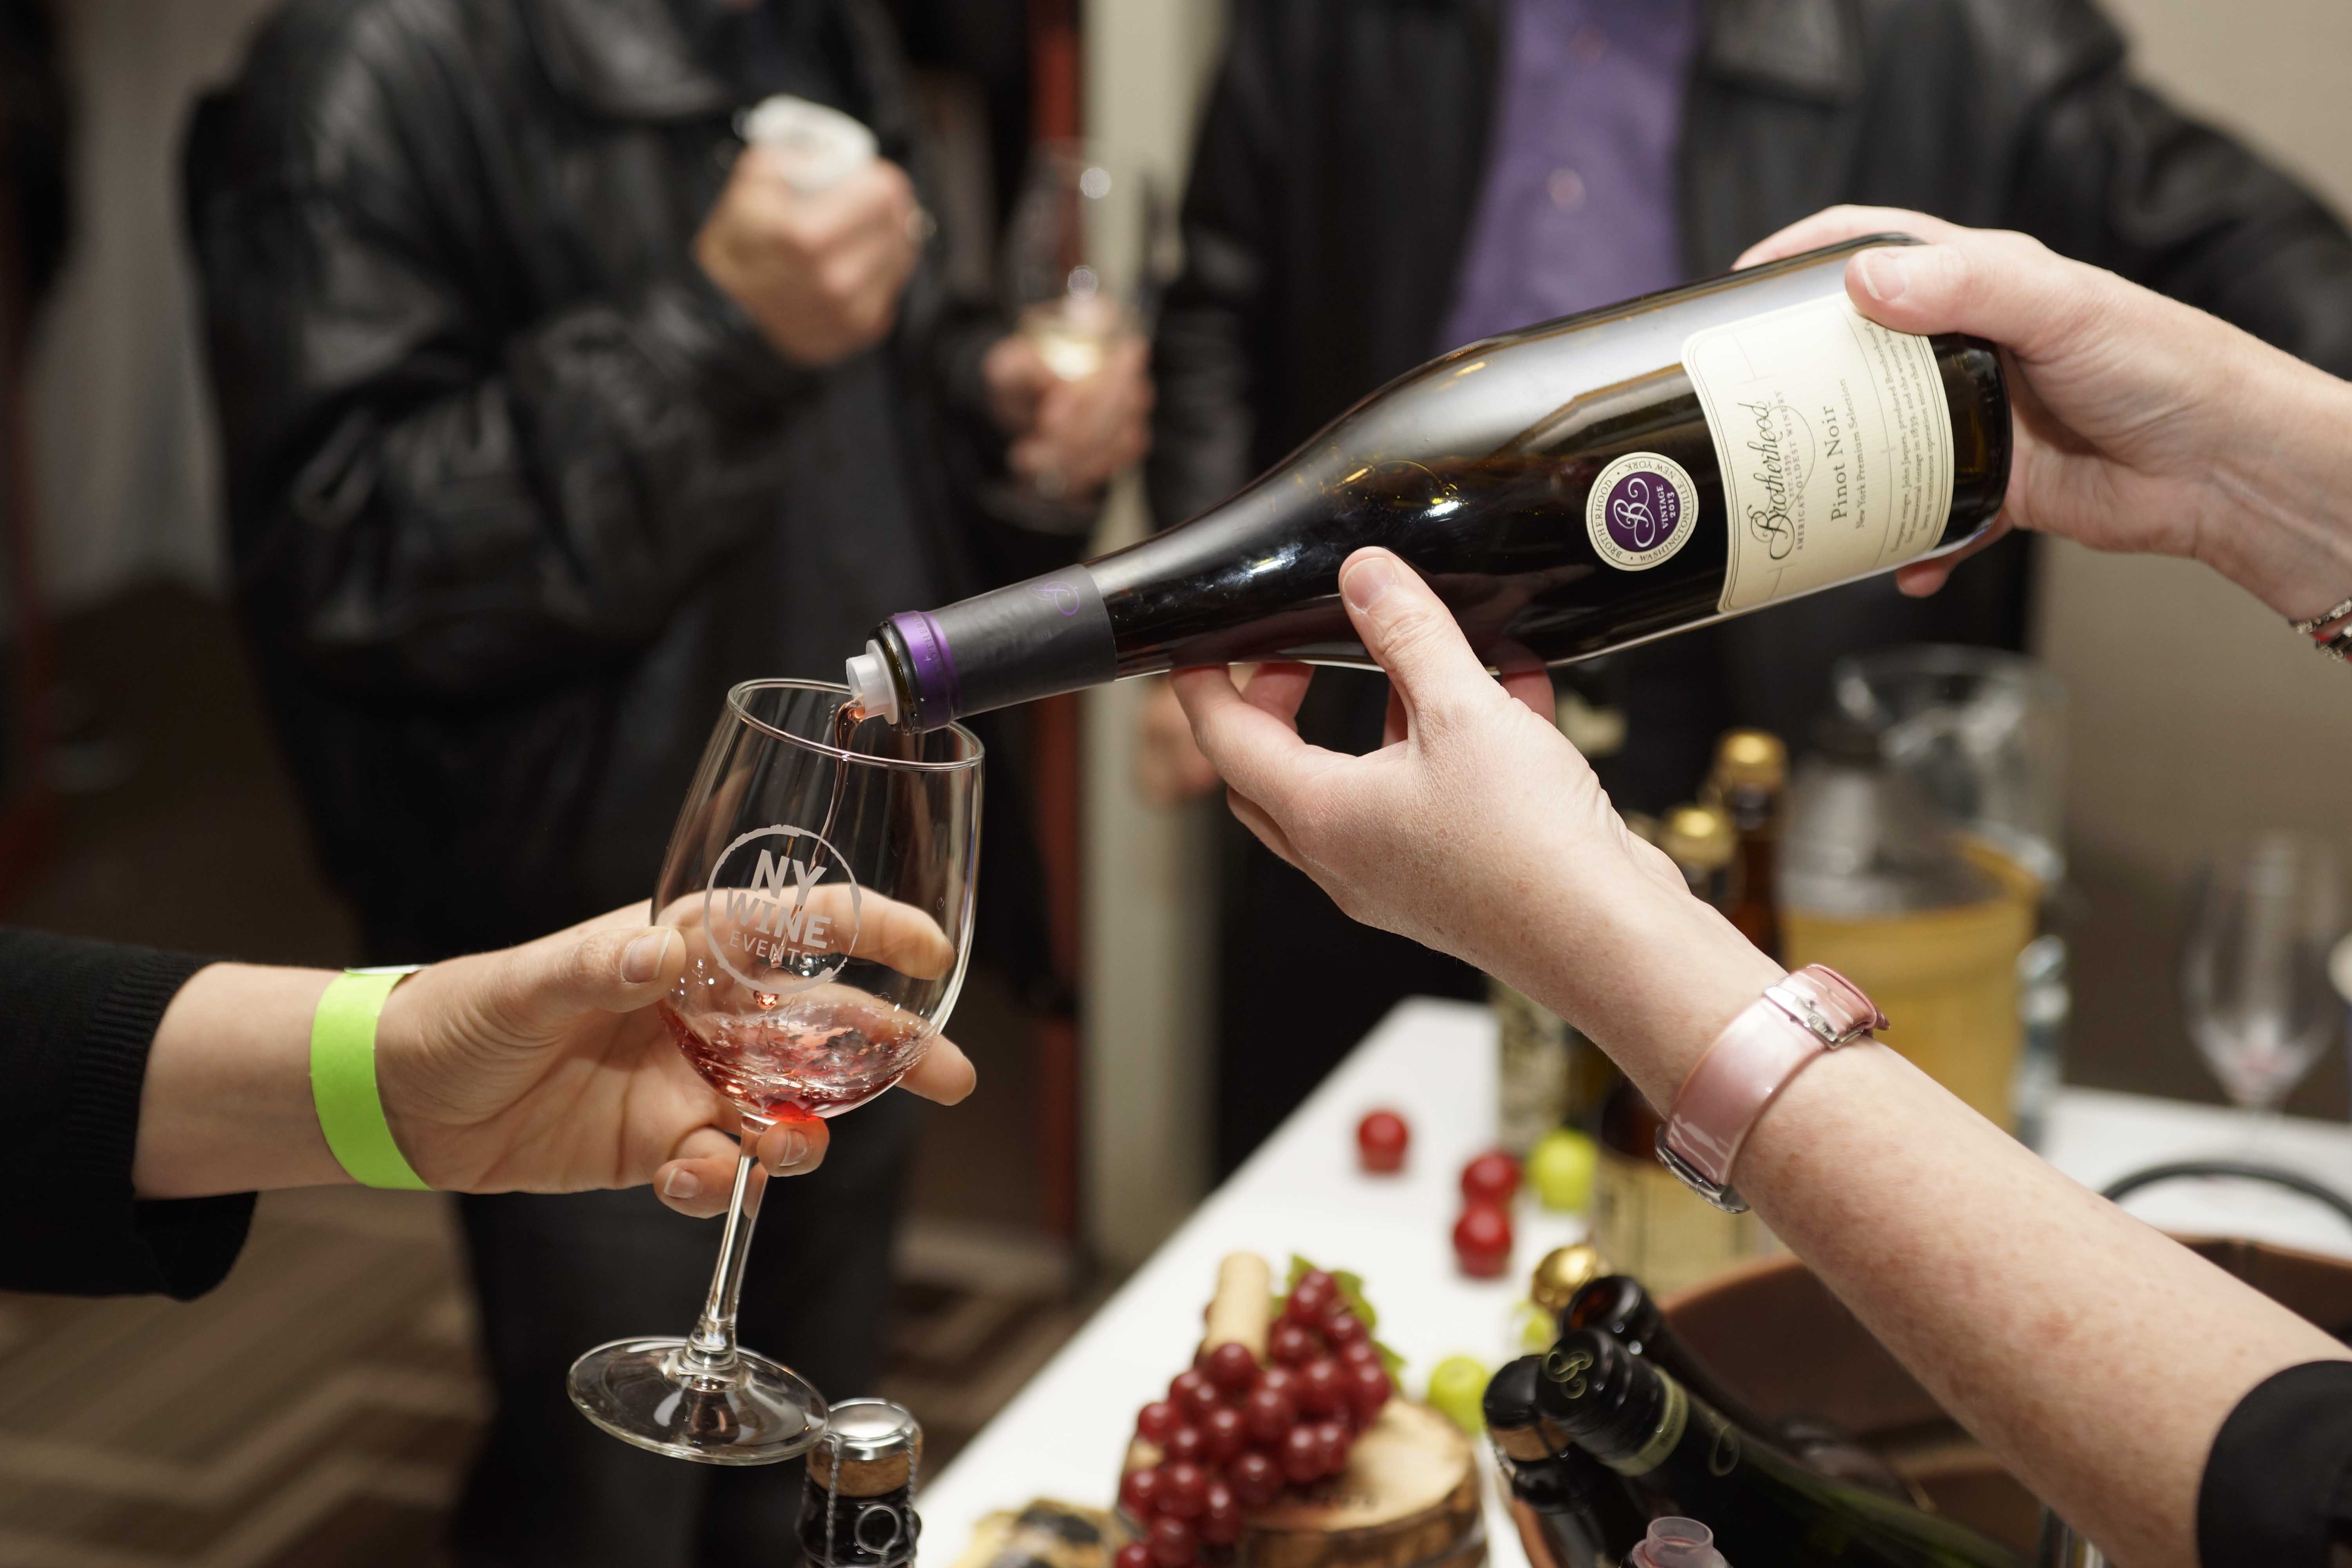 New York Wine Events presents two winter tasting events in February 2016.